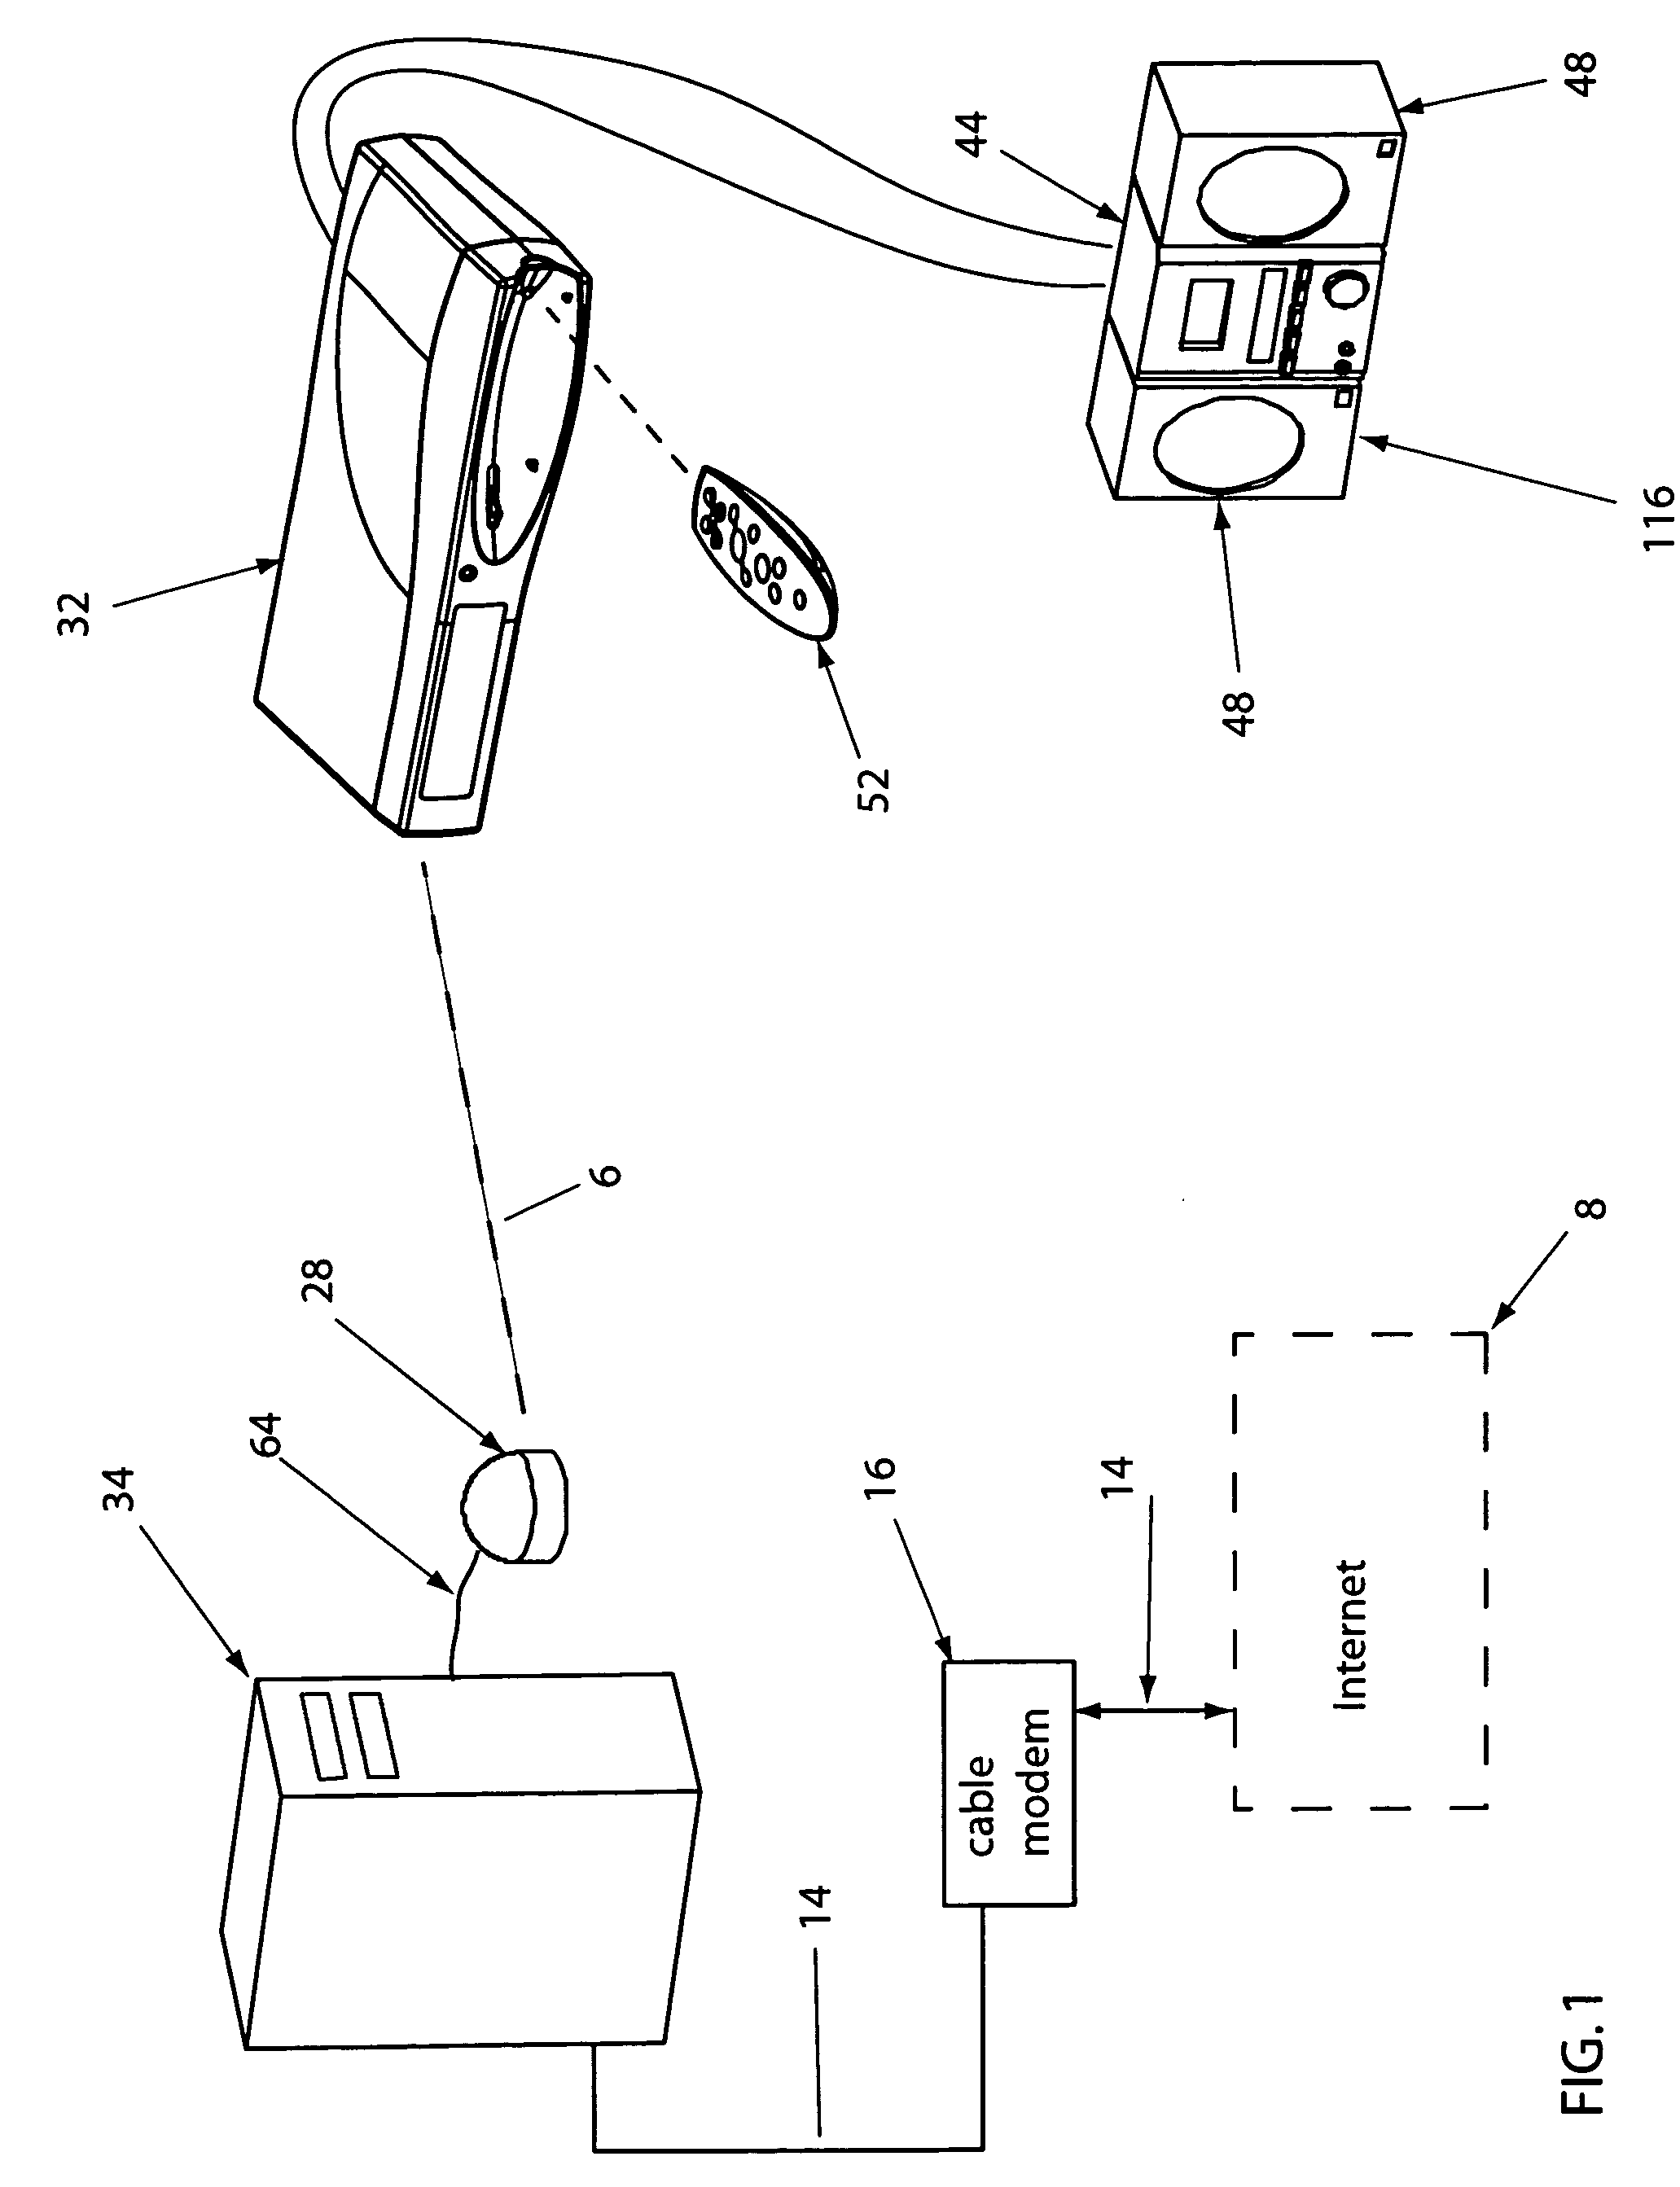 Audio converter device and method for using the same